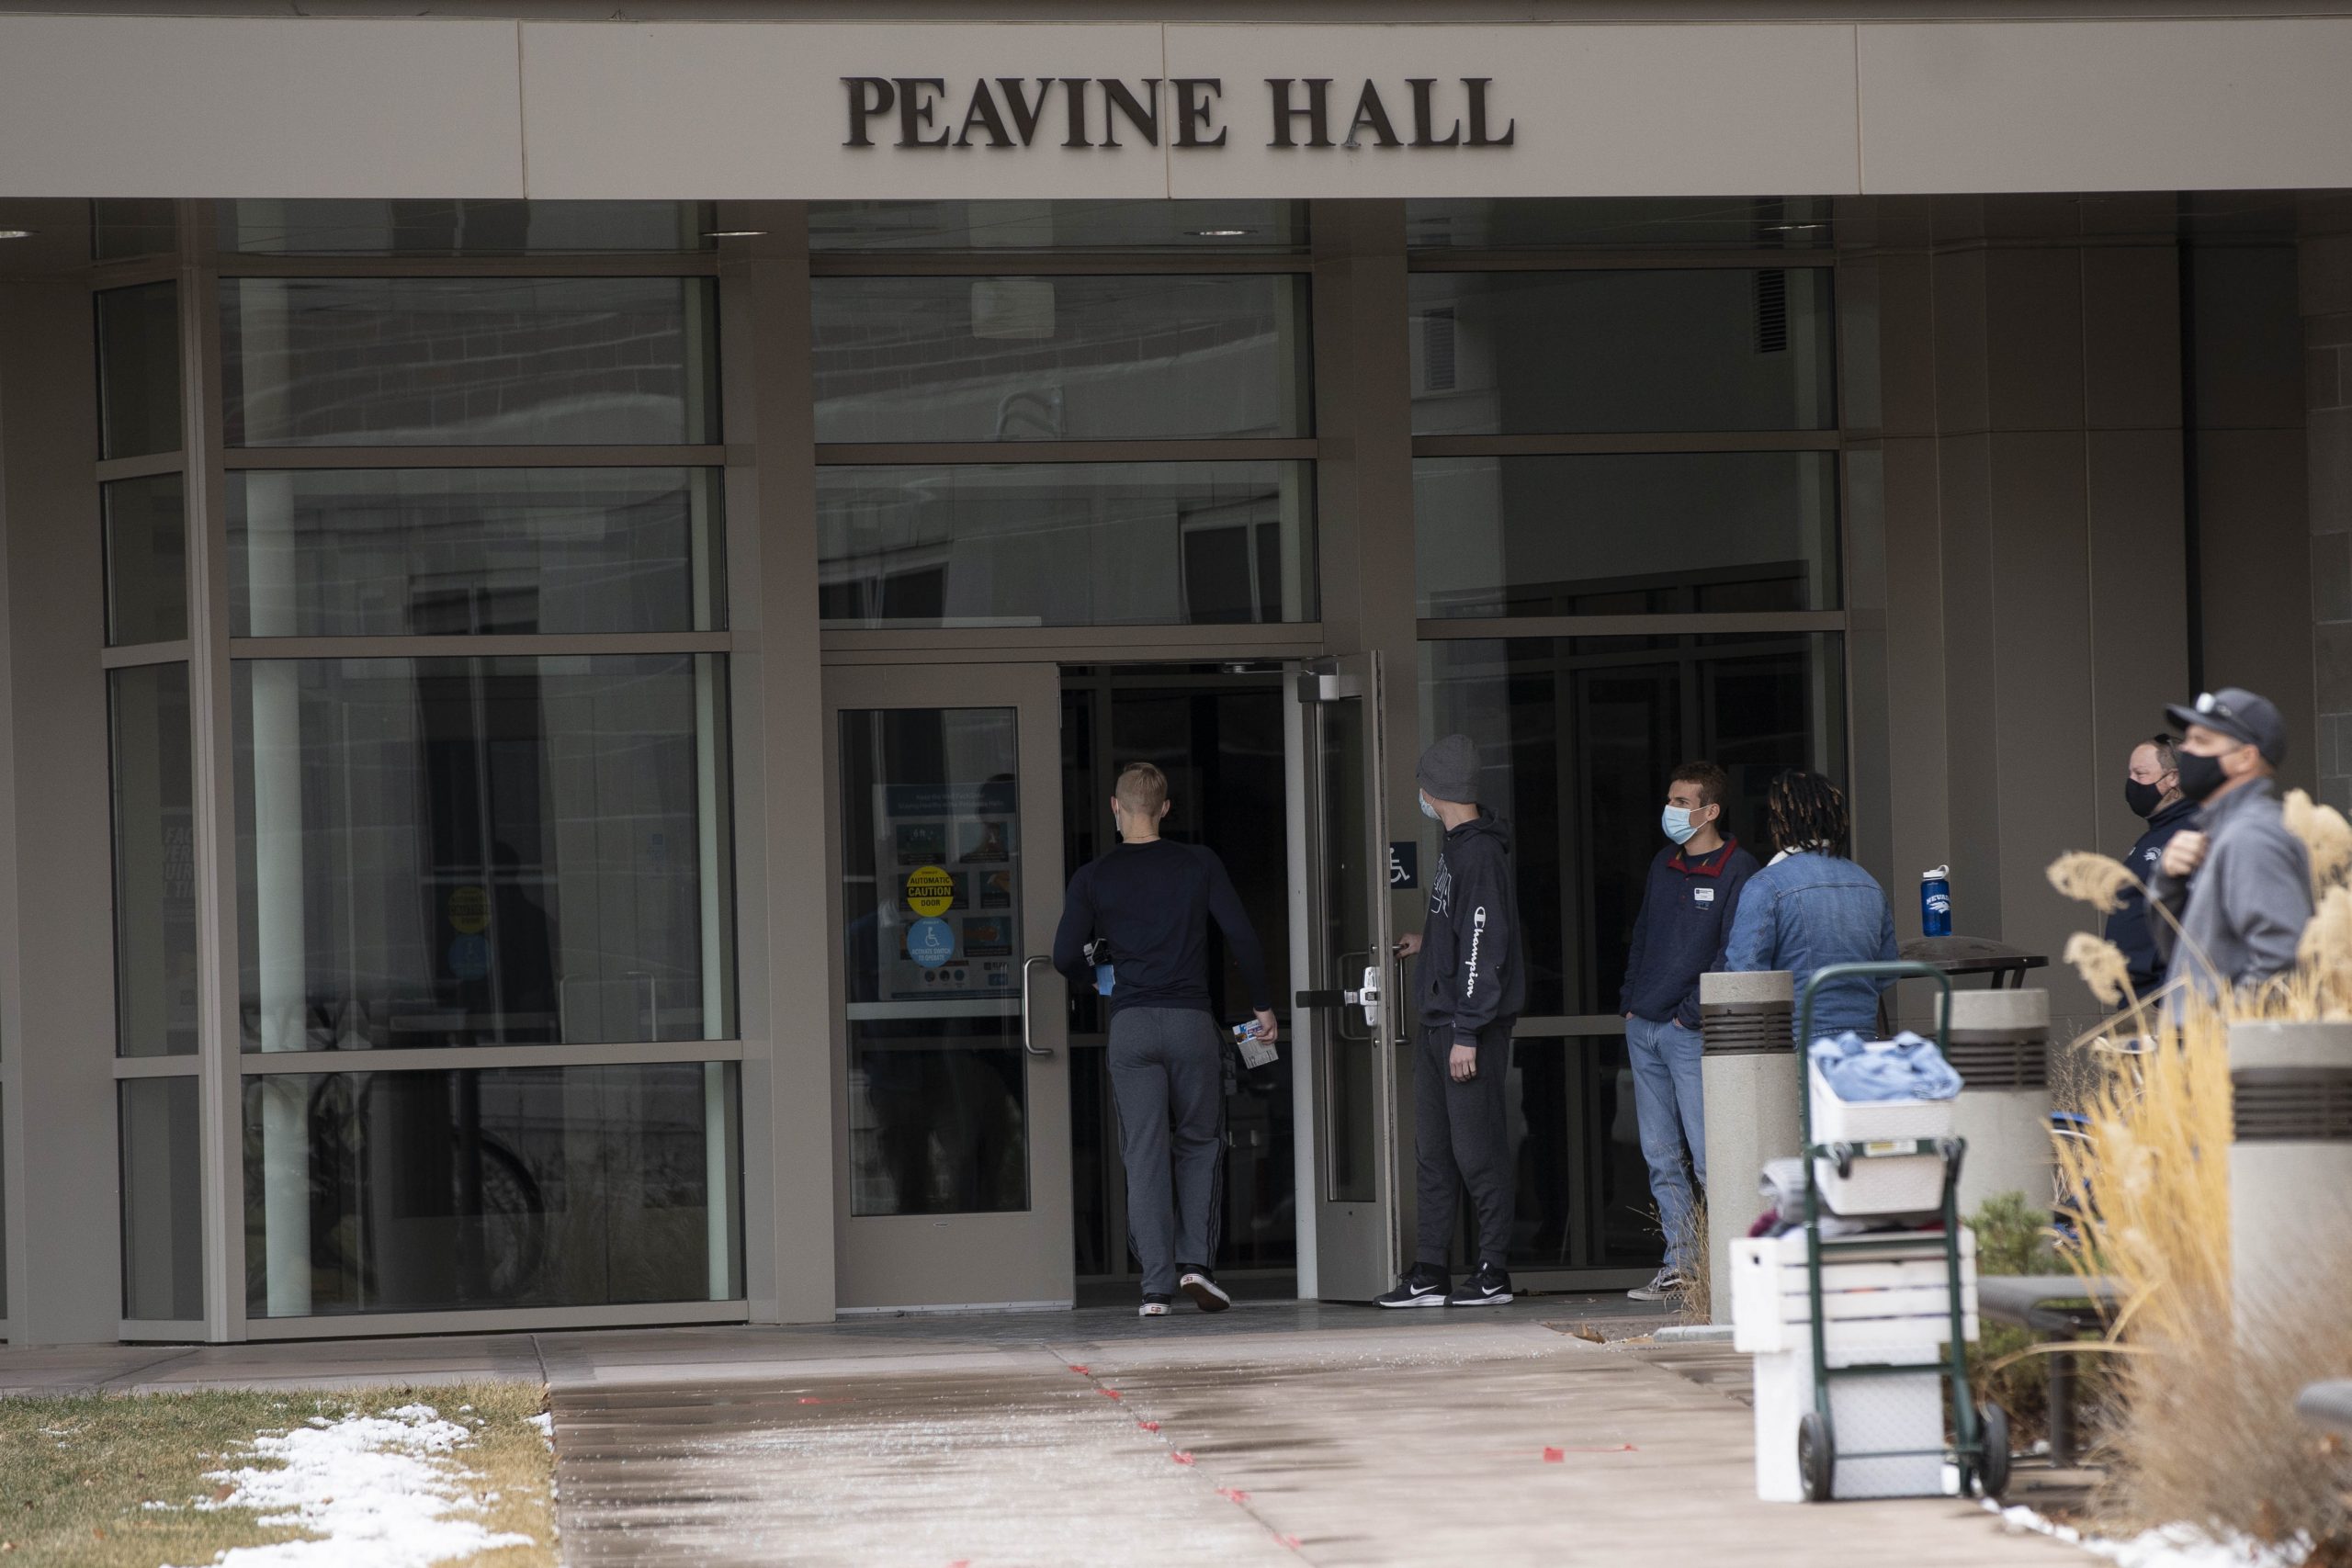 Students move in to Peavine Hall while wearing masks as part of COVID-19 precautions